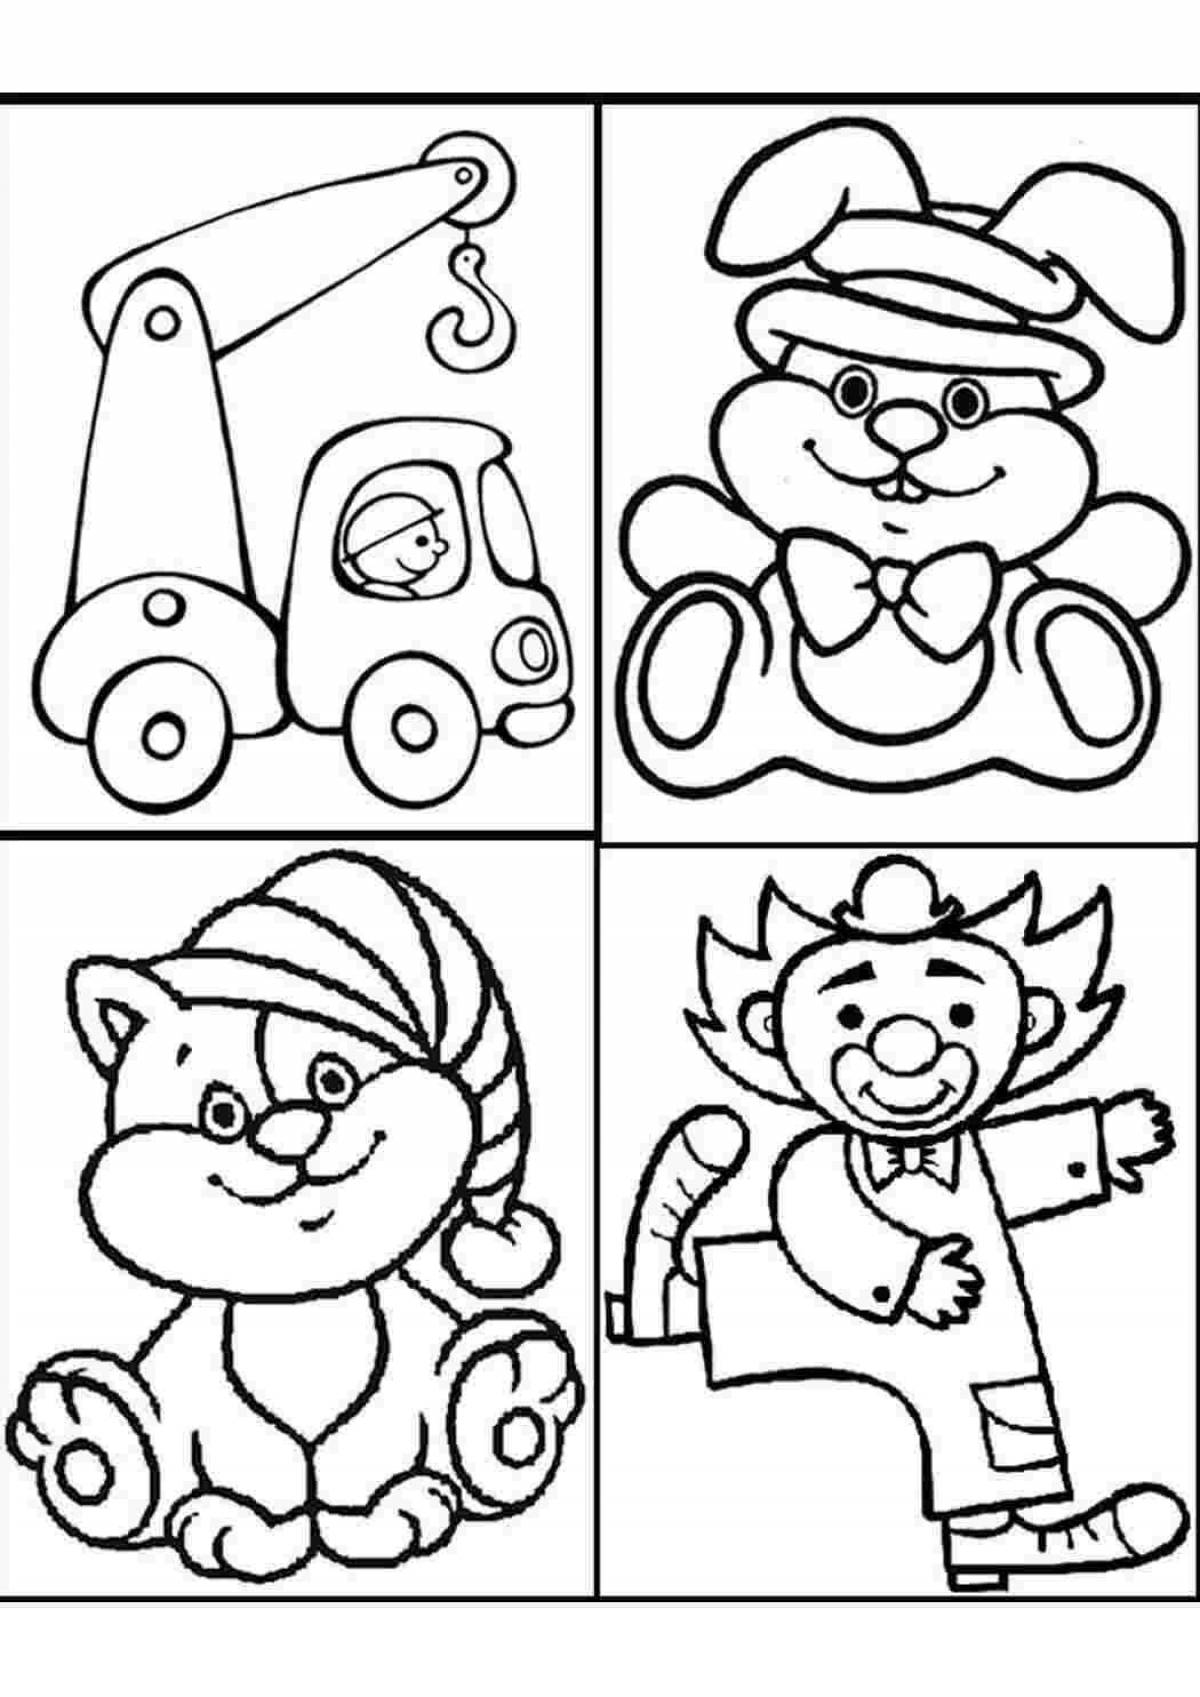 Fun a5 coloring book for kids